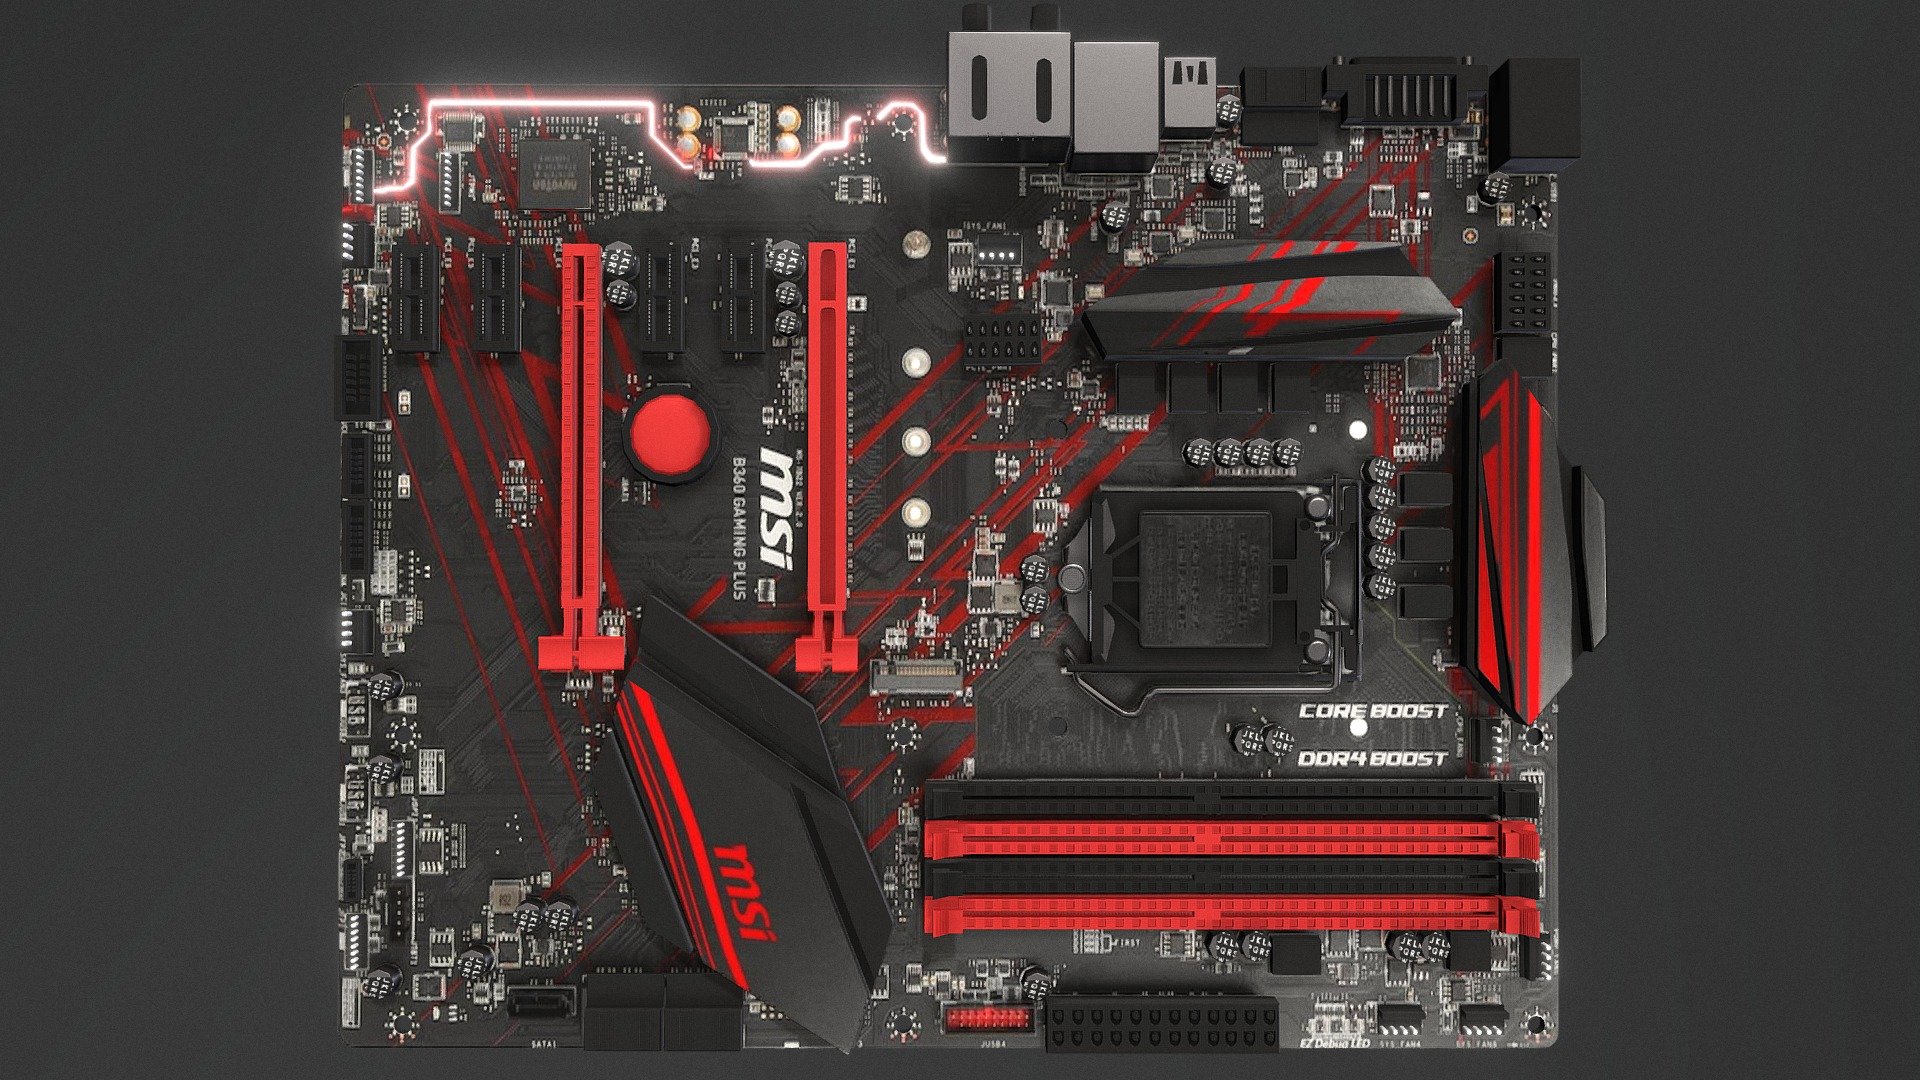 MSI B360 GAMING PLUS
Jeu, Socket 1151, Intel B360, 2 ports PCI-Express 16x, 2666 MHz (DDR4), SATA Revision 3.0 (6 Gb/s), 1 port M.2 (SATA et PCIE), 2 ports USB 3.1 (1 type A + 1 type C), ATX, 304 x 243 mm

this comes  withe a native blender file with all parts separated (ideal for animating it ) 
the model comes with 2 textures 
texture1 is main textures 
texture2 is the letters on the circular thing on the motherboard 
and a hanful of materials set up in blender for all the other parts - MSI B360 GAMING PLUS - 3D model by KI NG (@dadybandit) 3d model